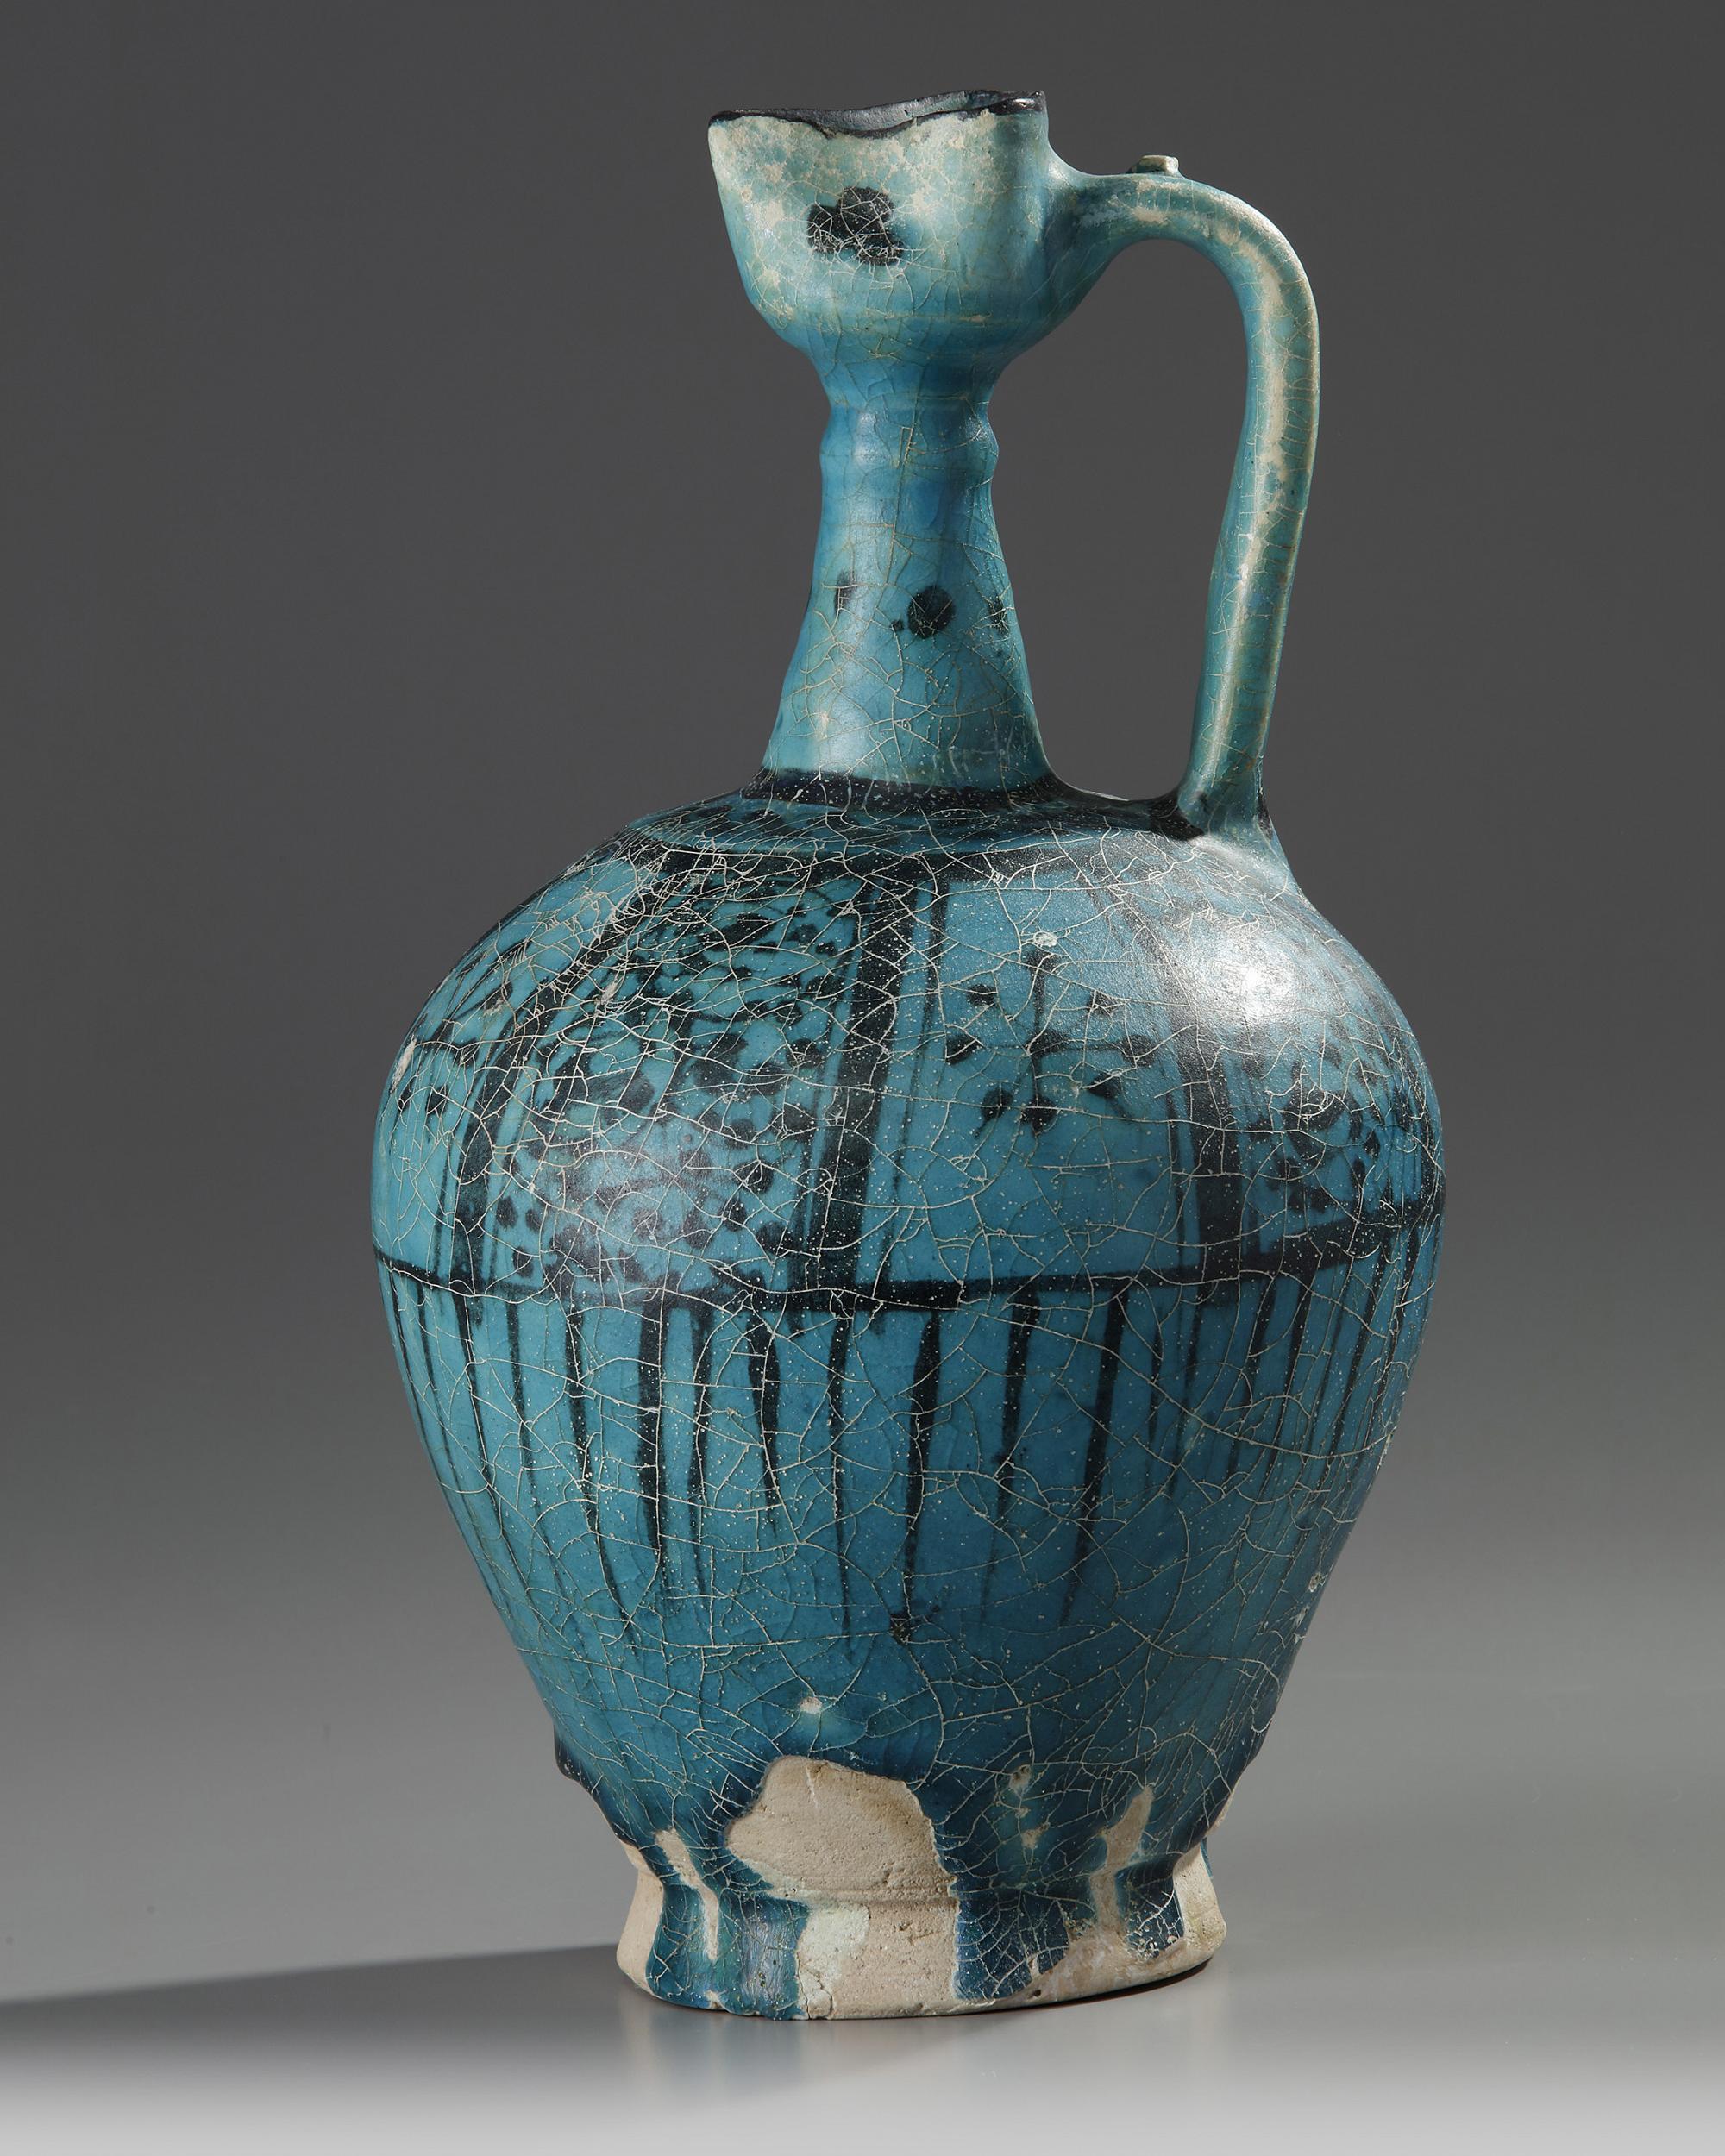 A LARGE RAQQA UNDERGLAZE PAINTED POTTERY EWER, SYRIA, 12TH-13TH CENTURY - Image 19 of 20